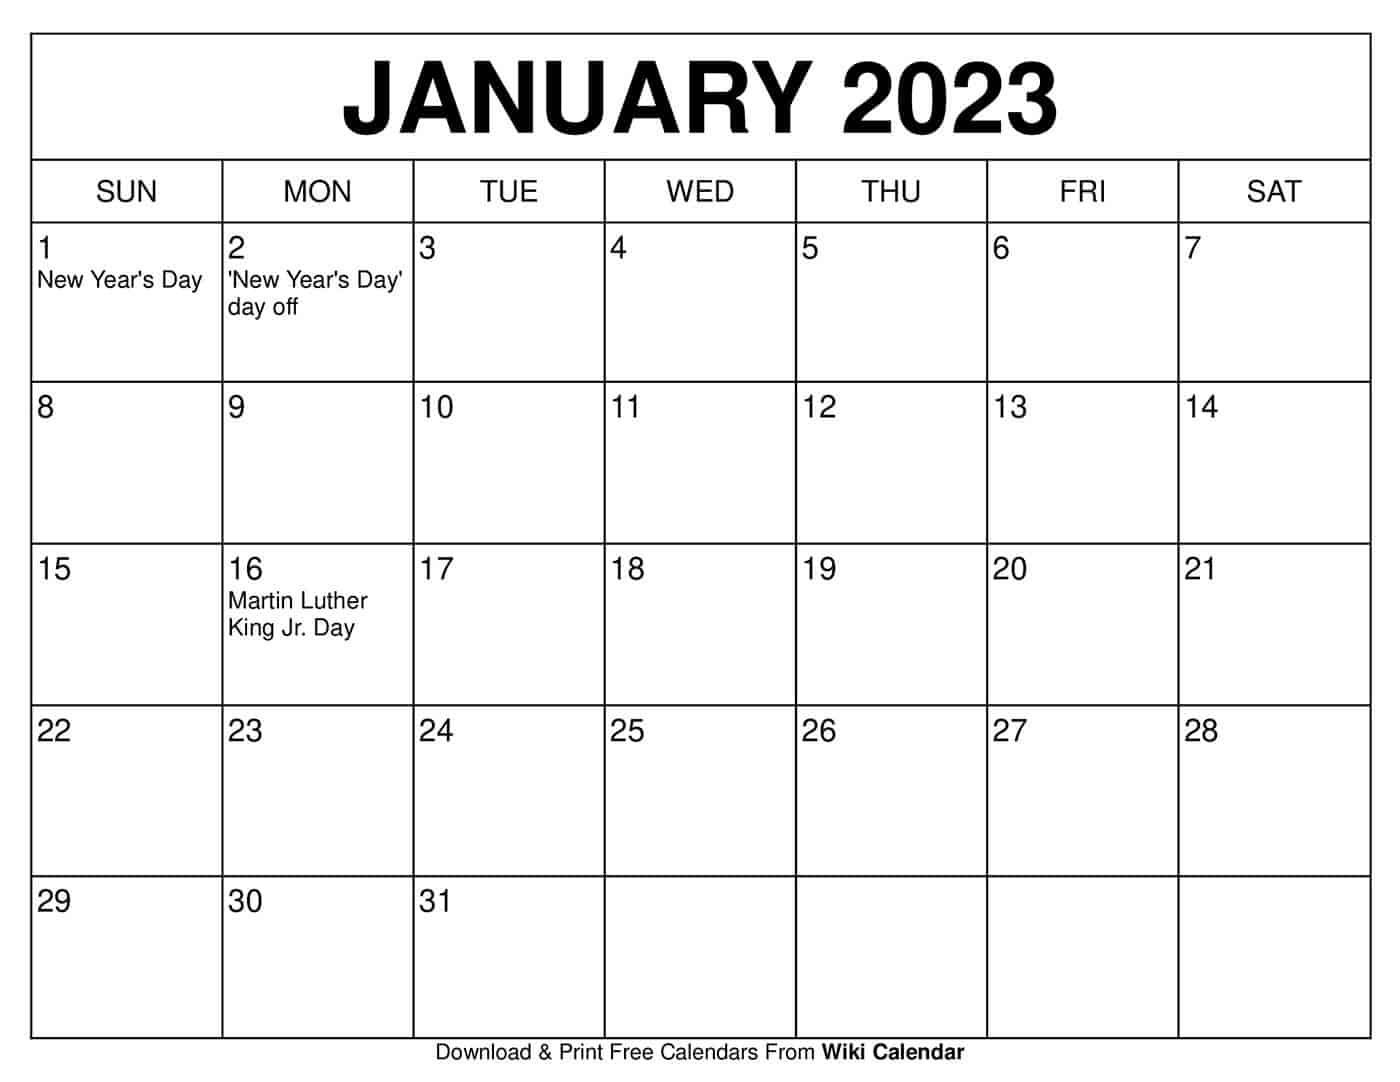 Download And Printable Calendars For 2023, 2024 - Wiki Calendar | Printable Calendar 2024 Wiki Calendar